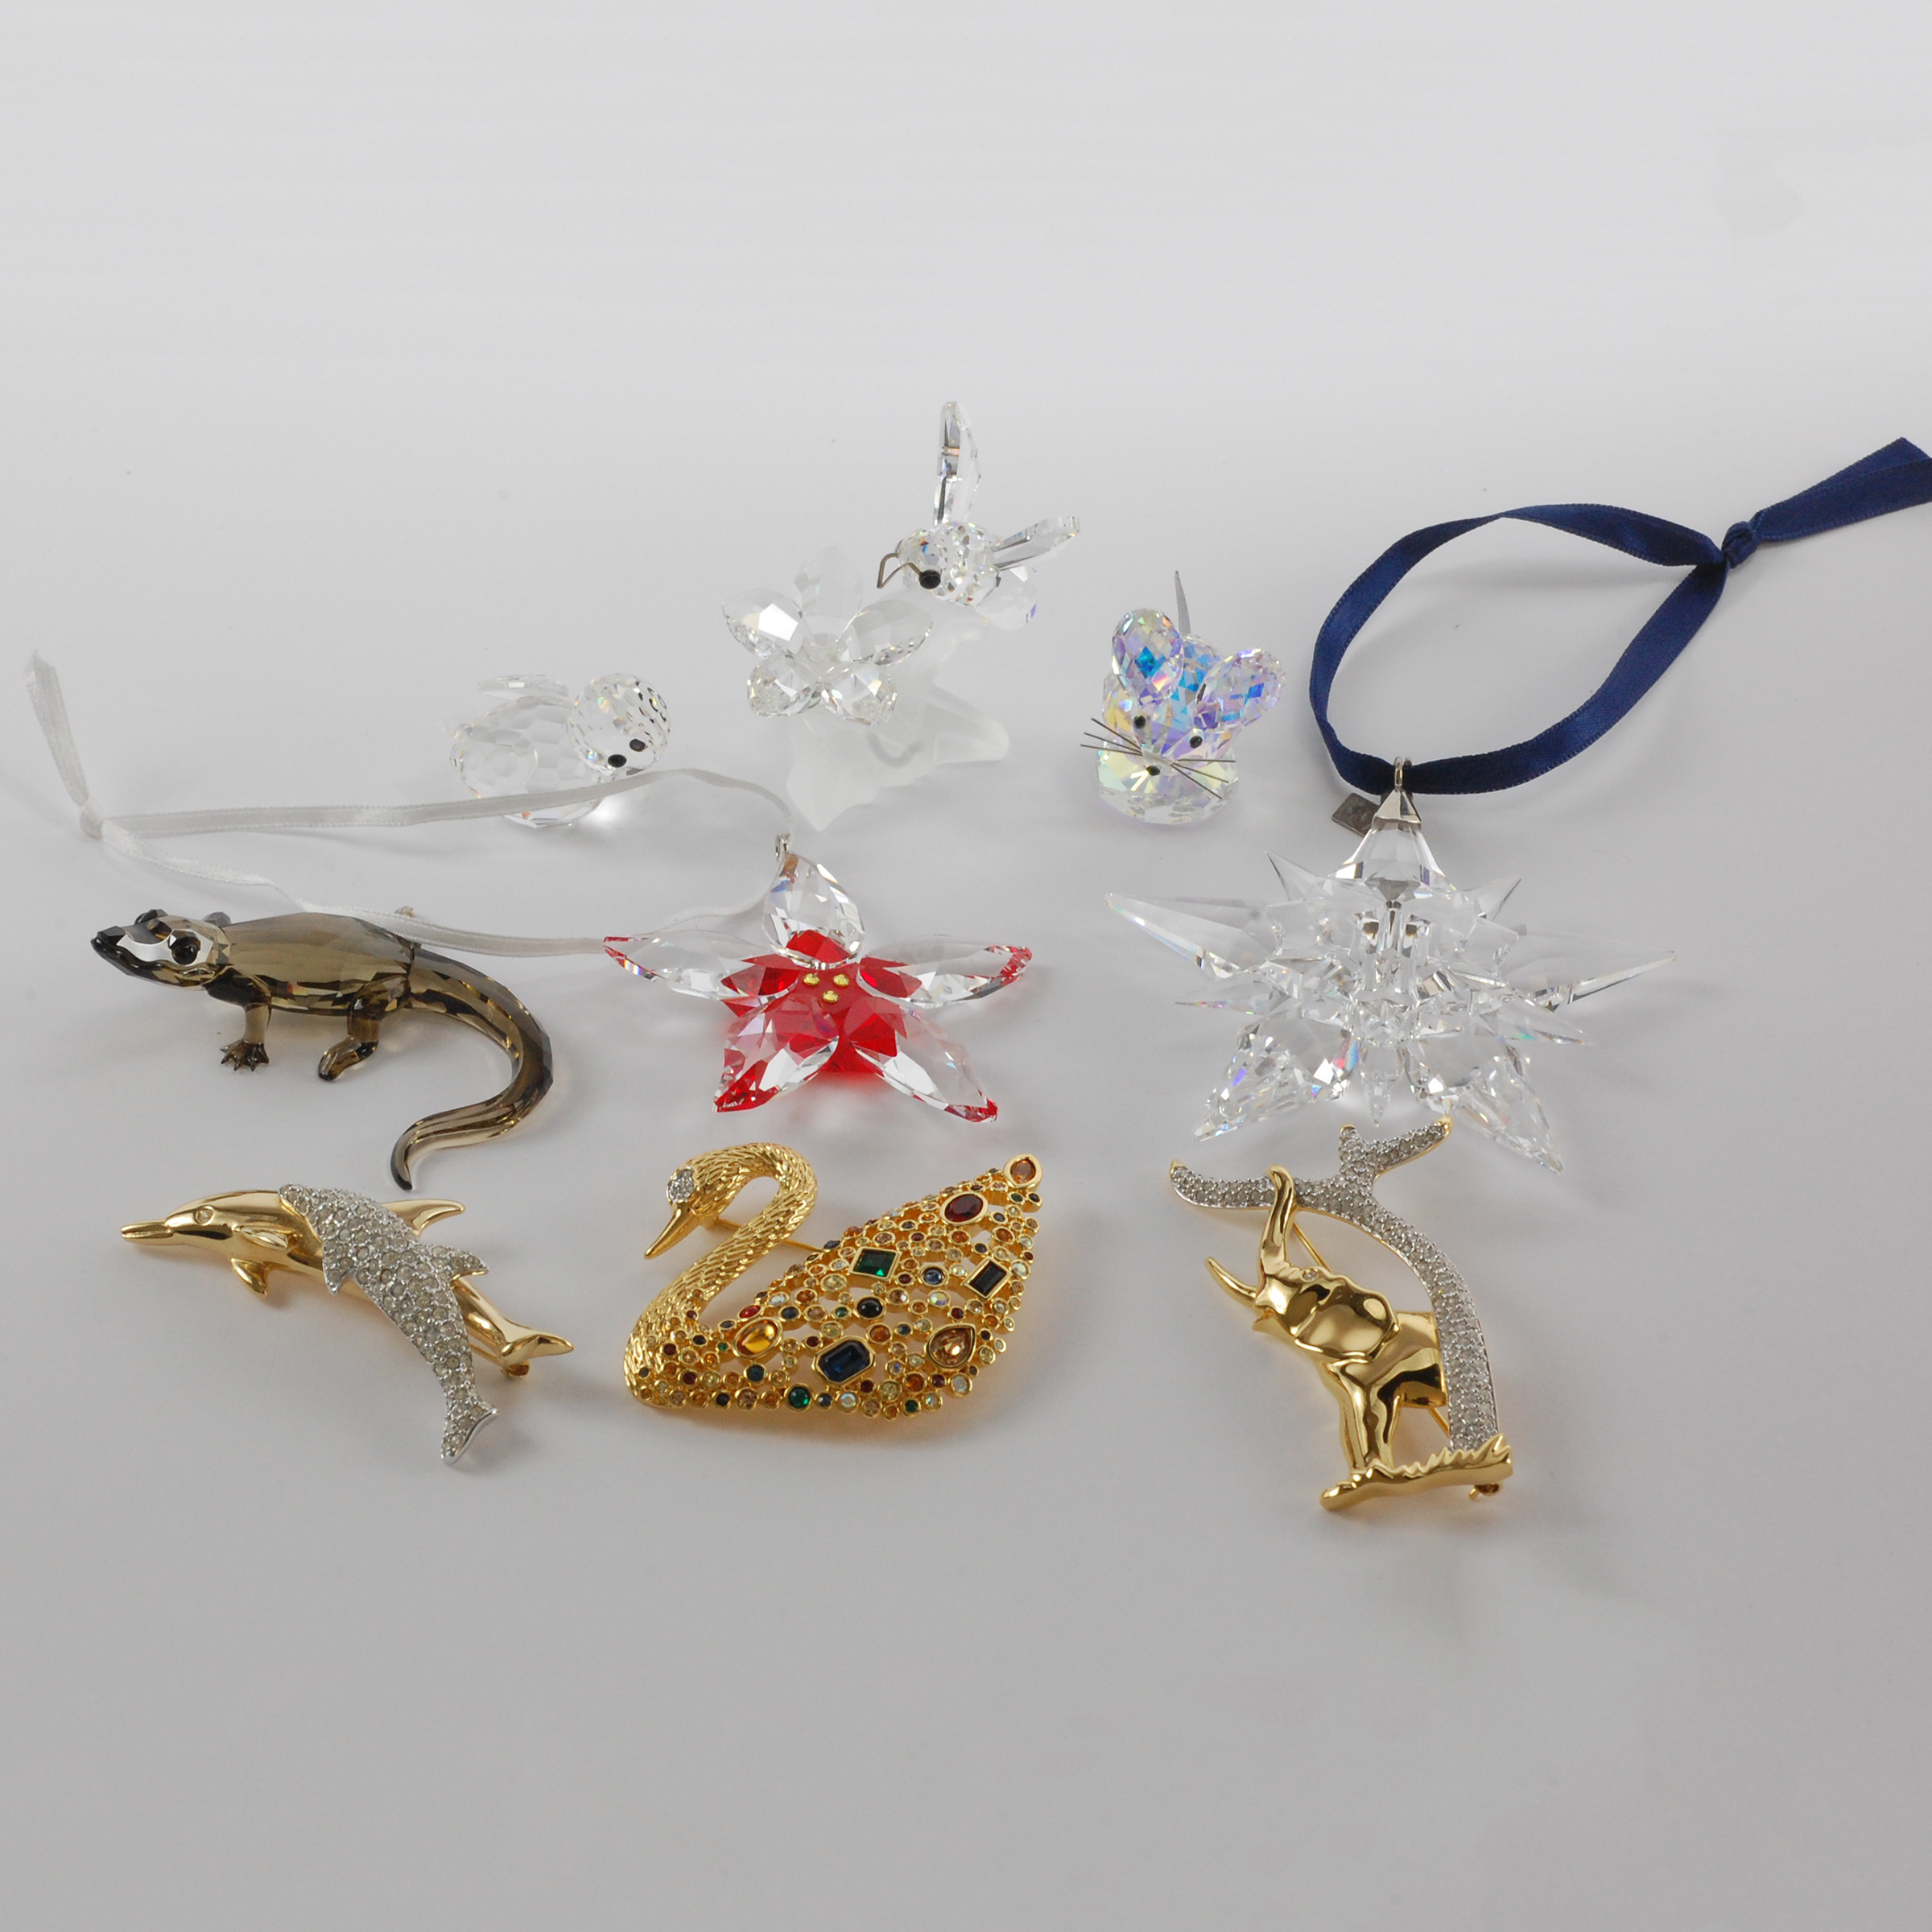 Five Swarovski Crystal Small Animal Figurines, Two Christmas Ornaments and Three Brooches, late 20th/early 21st century